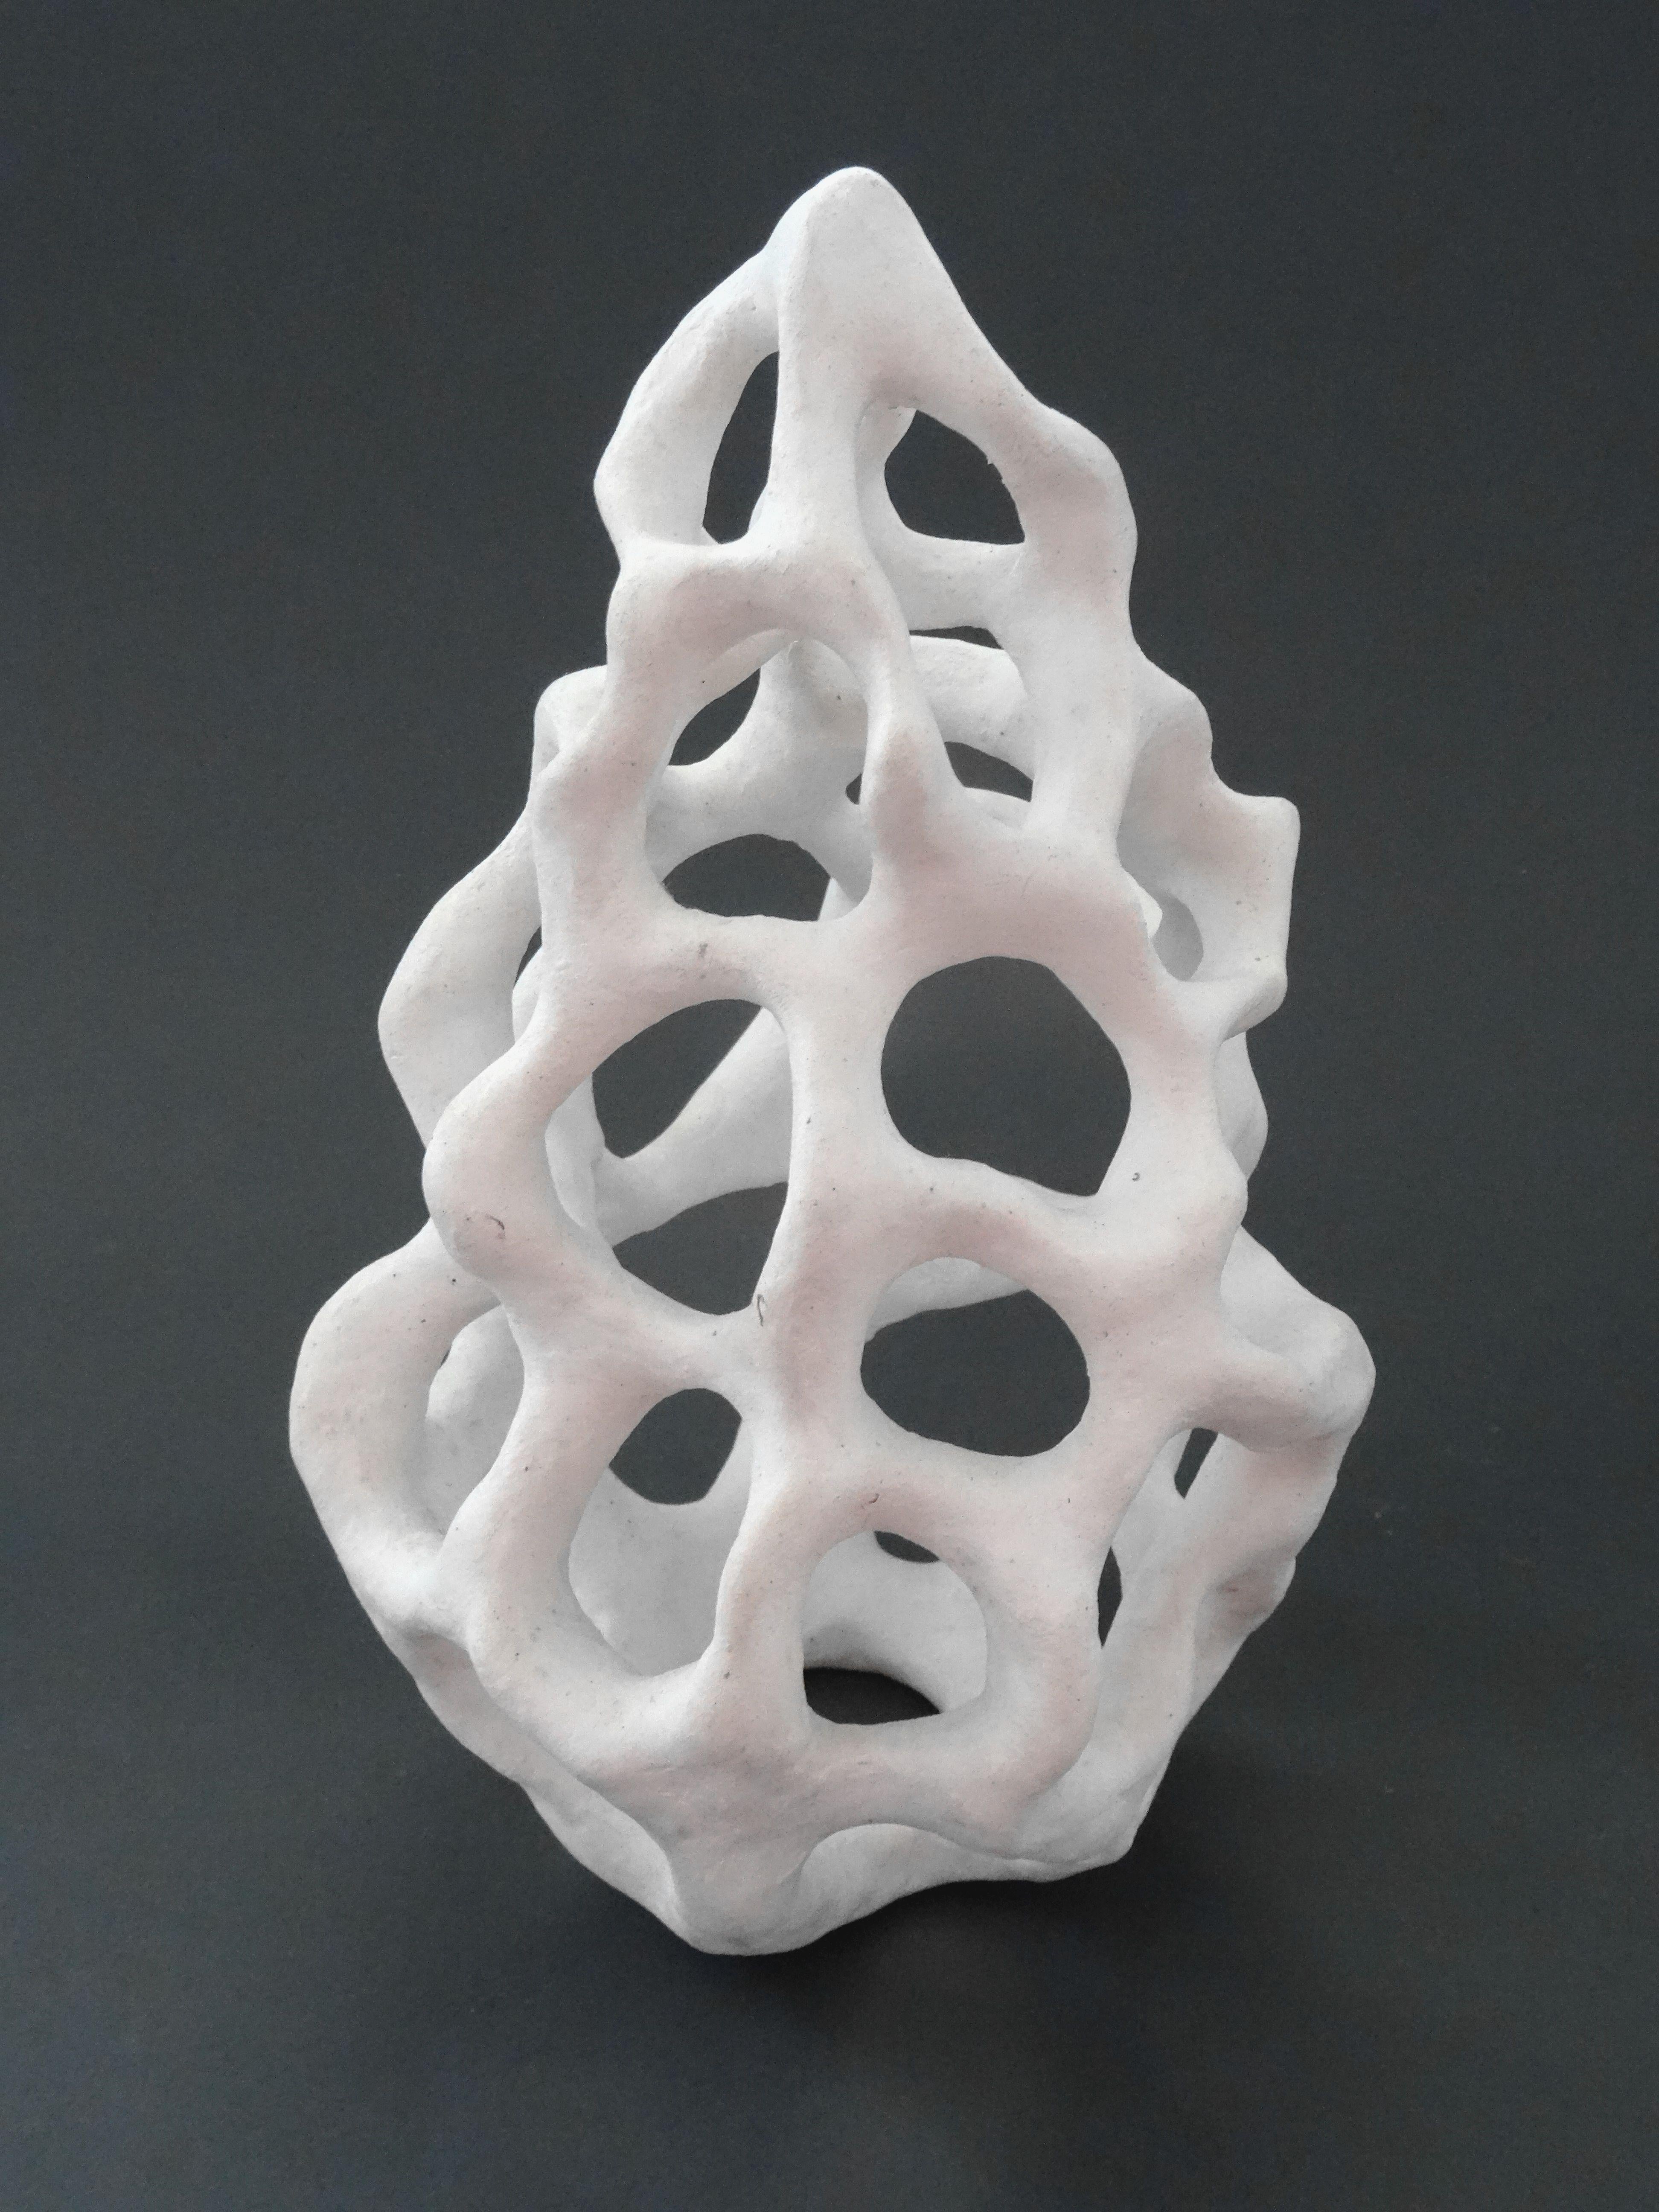 Infinity loops. White stone mass h 24 cm - Sculpture by Elina Titane 